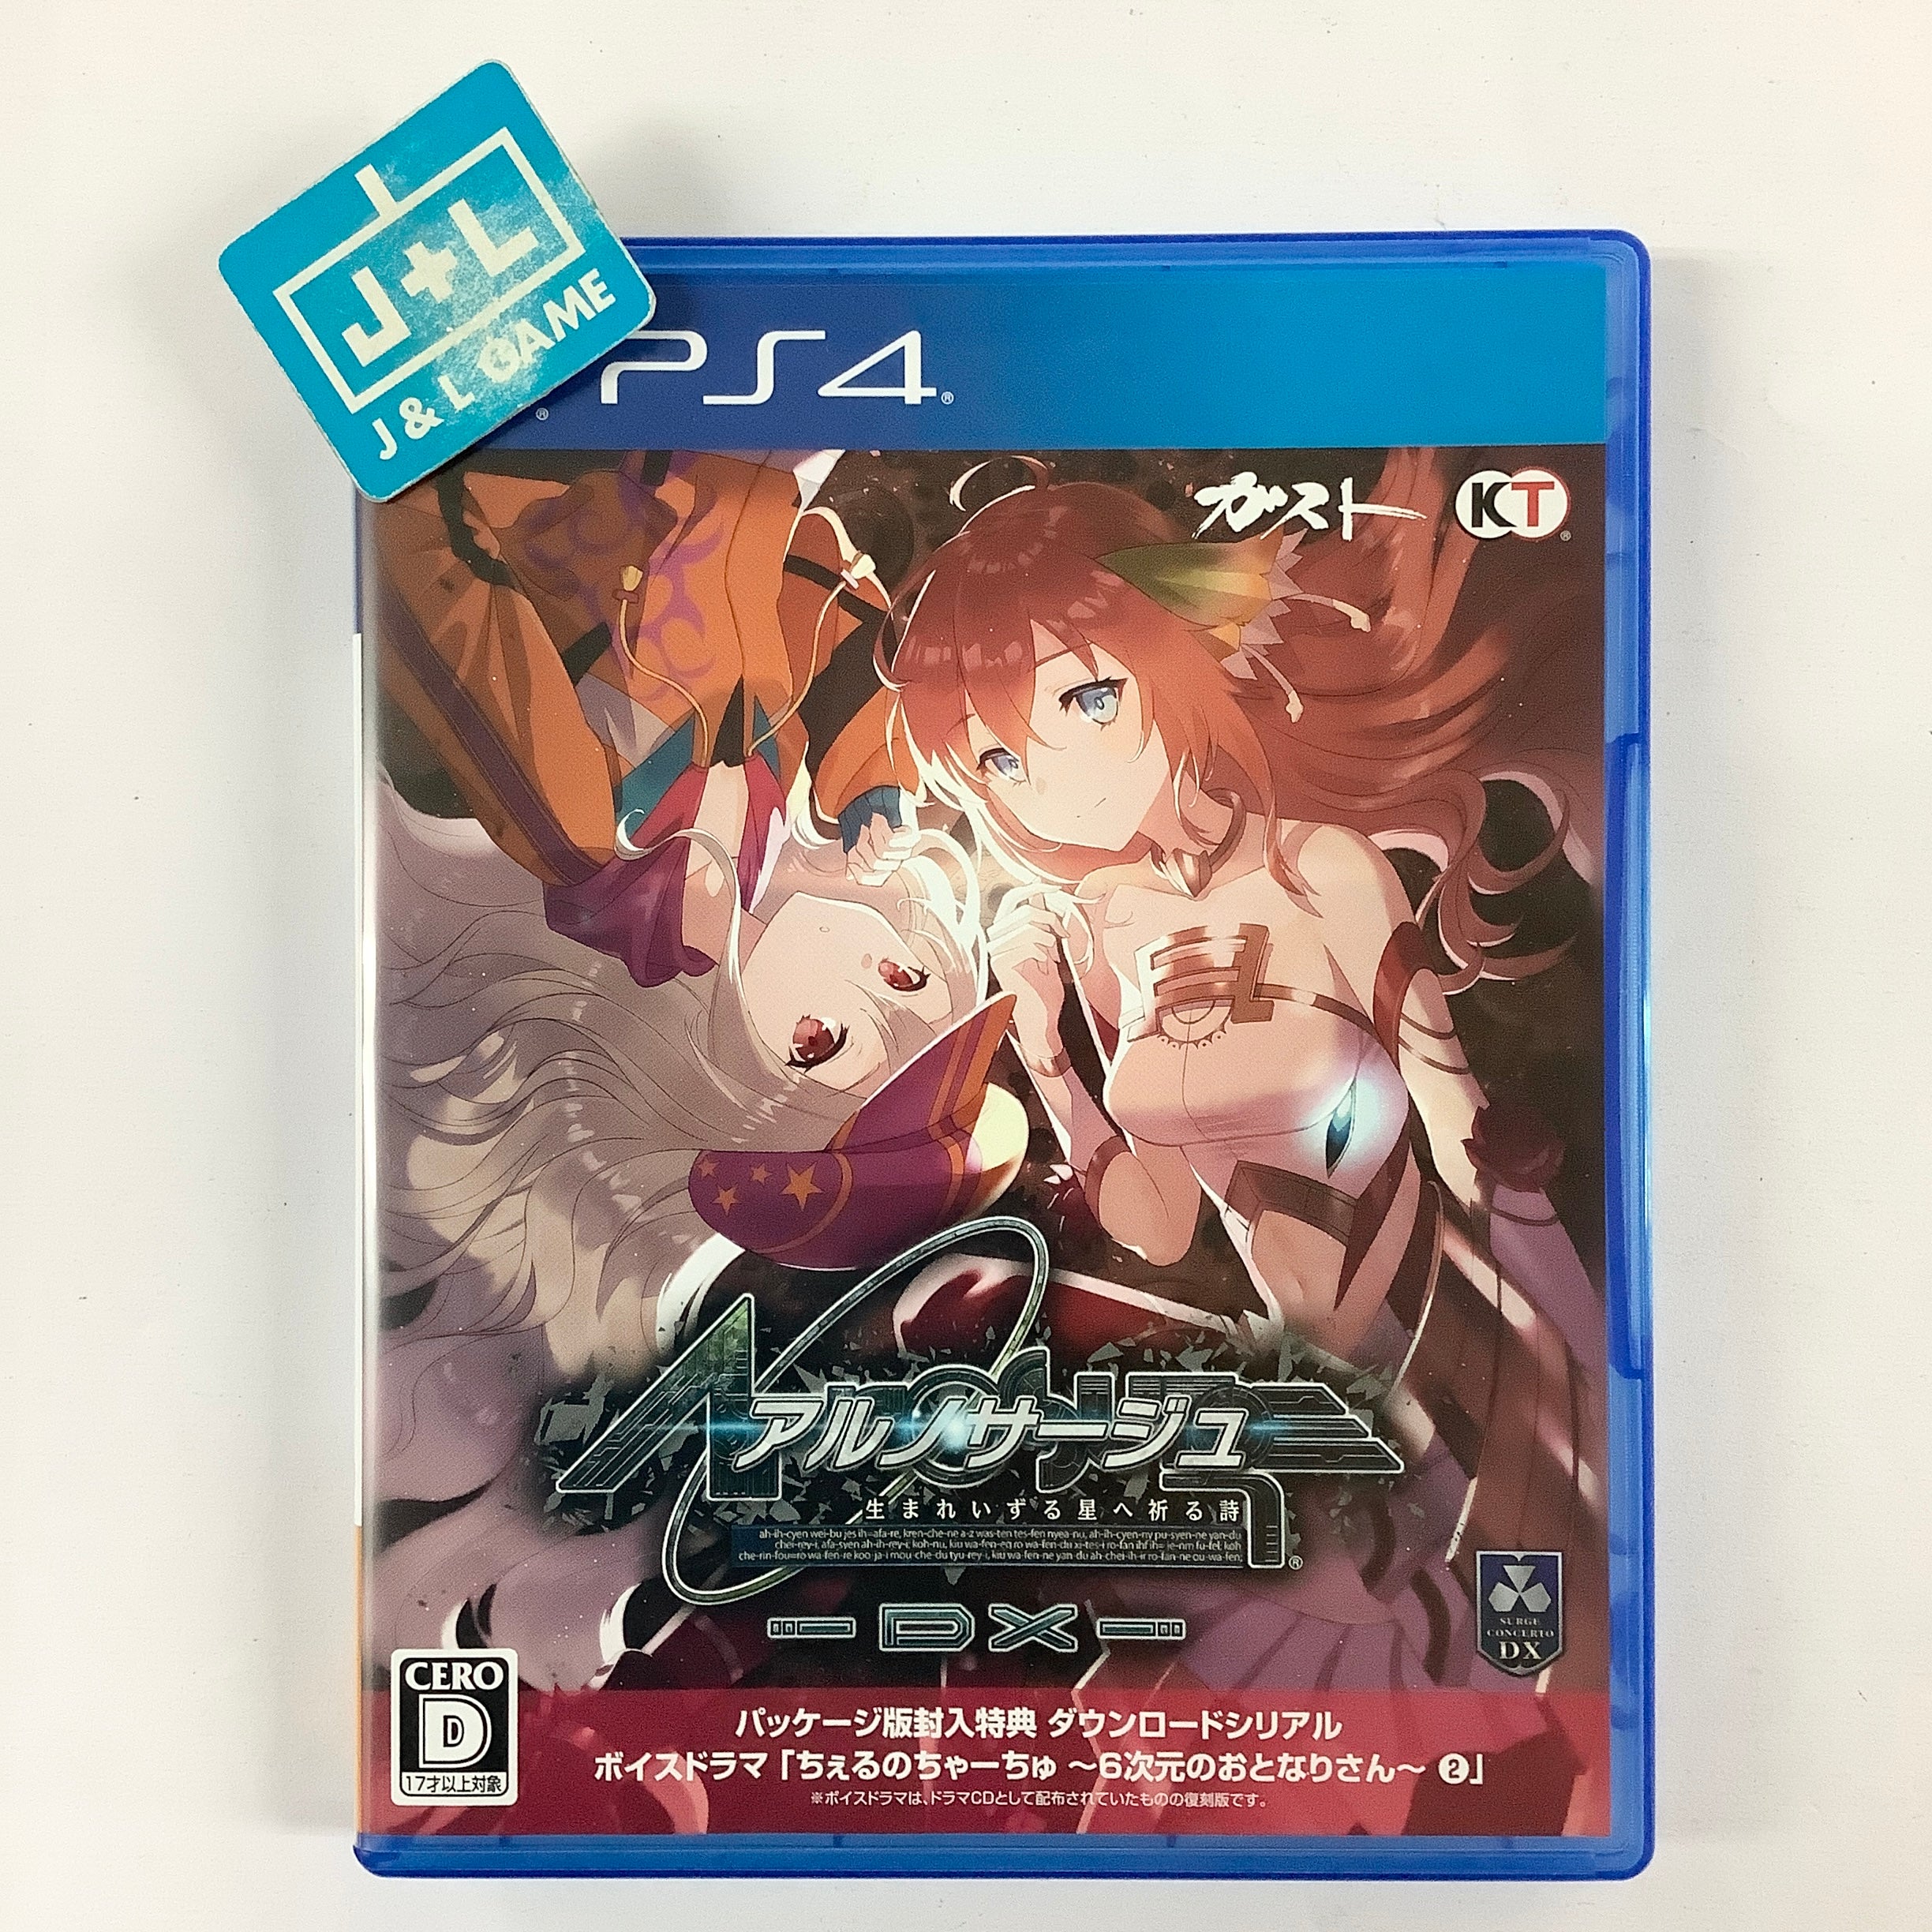 Ar nosurge DX - (PS4) PlayStation 4 [Pre-Owned] (Japanese Import) Video Games Koei Tecmo Games   